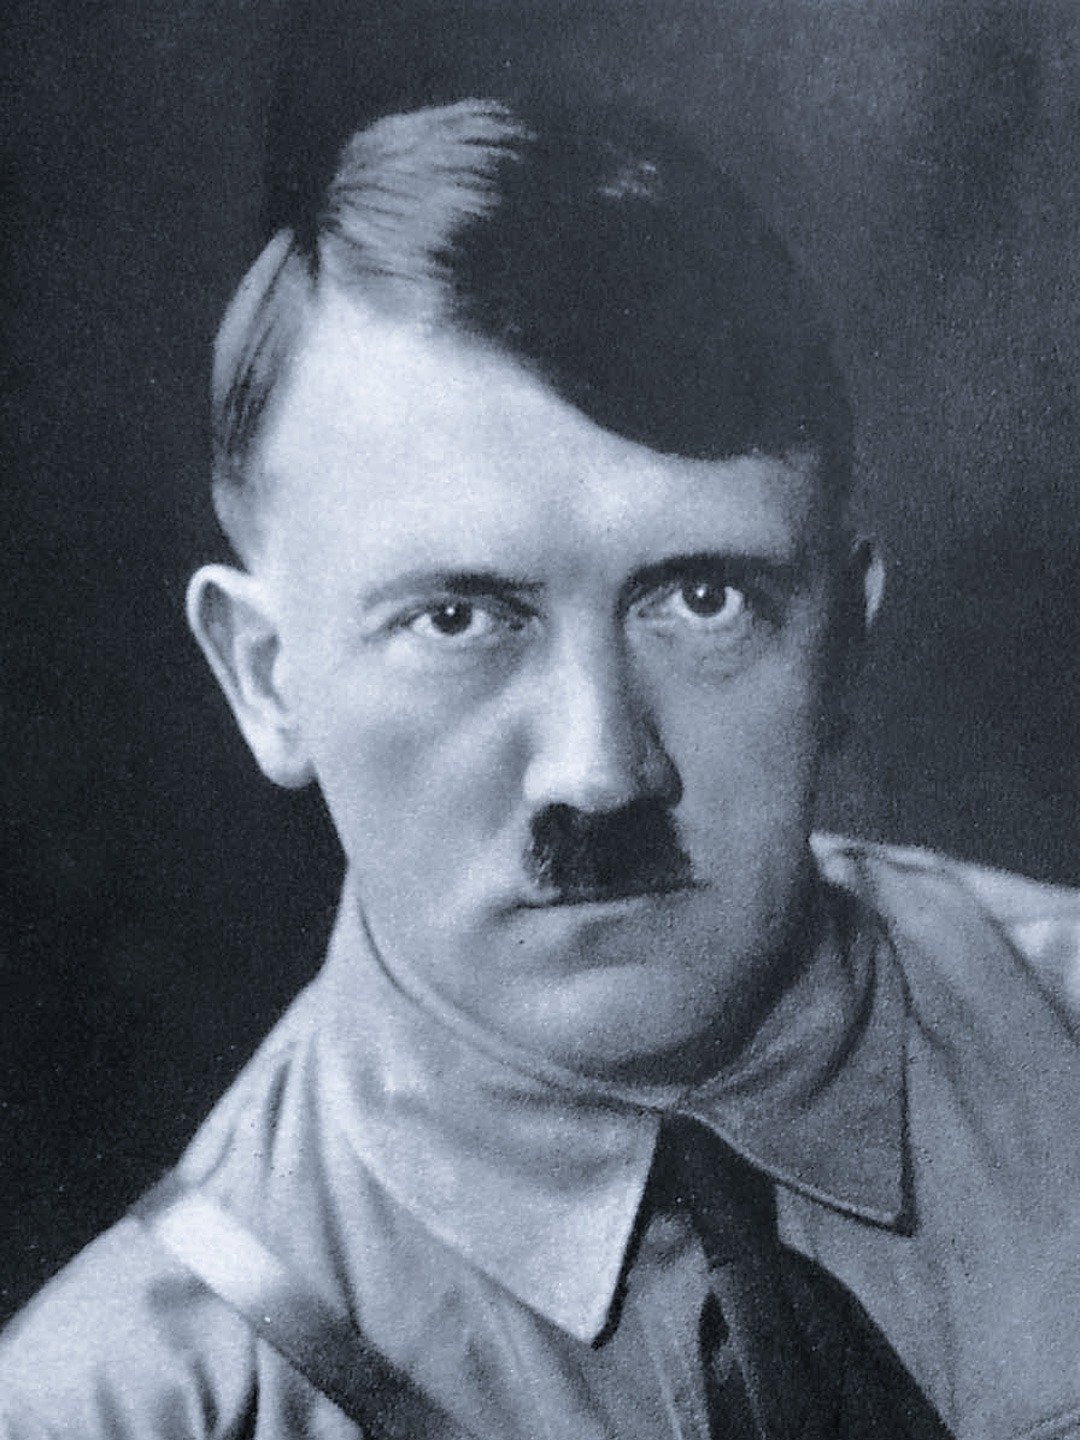 How tall is Adolf Hitler?